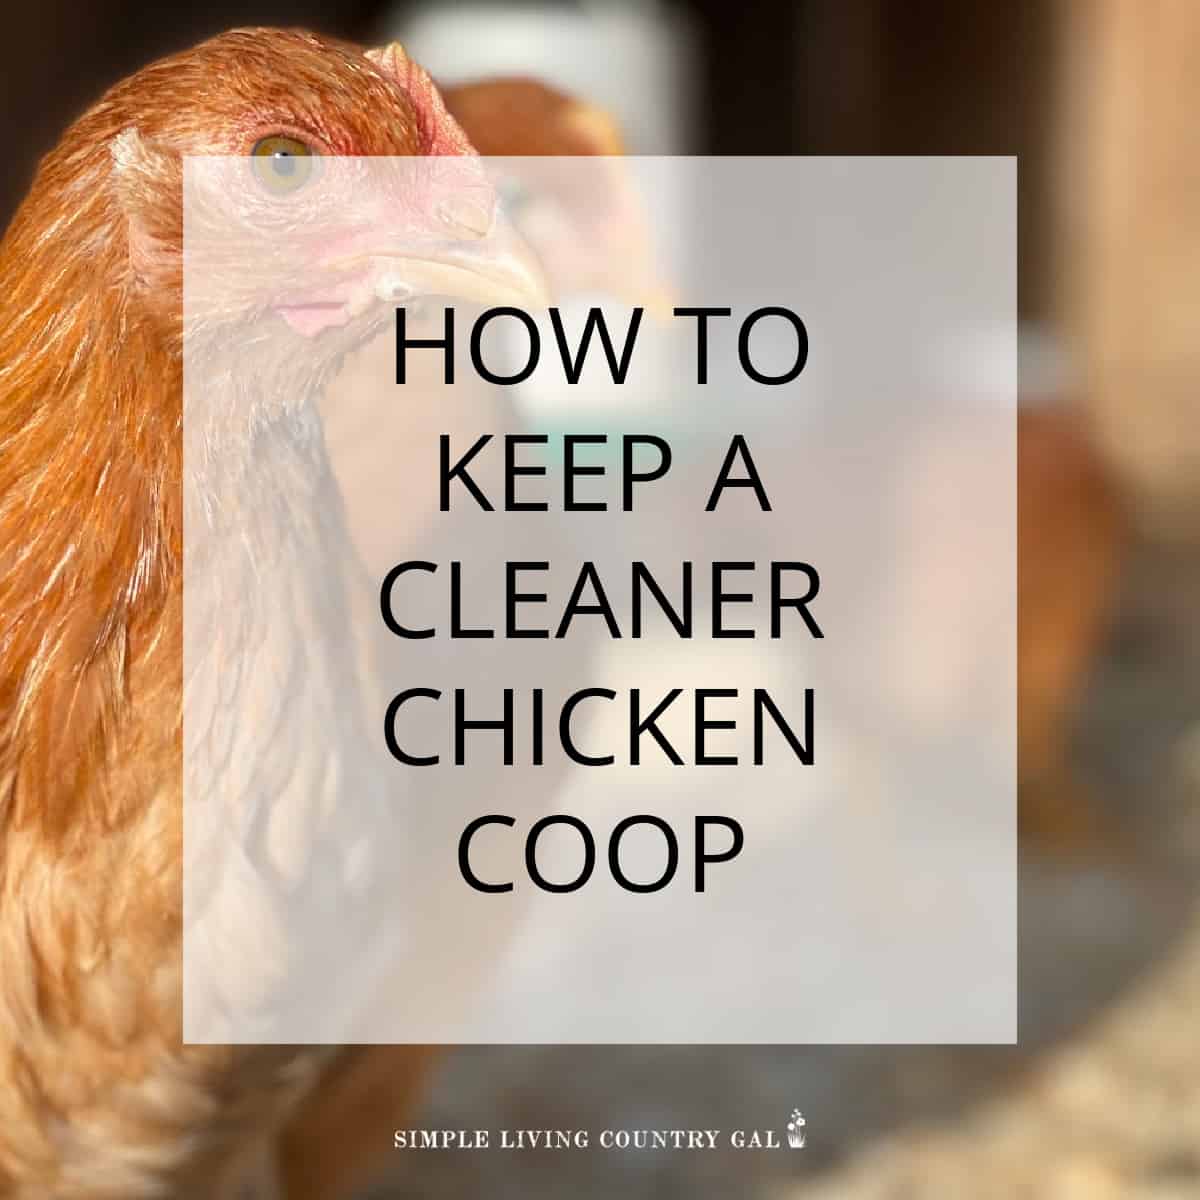 HOW TO KEEP A CLEAN CHICKEN COOP